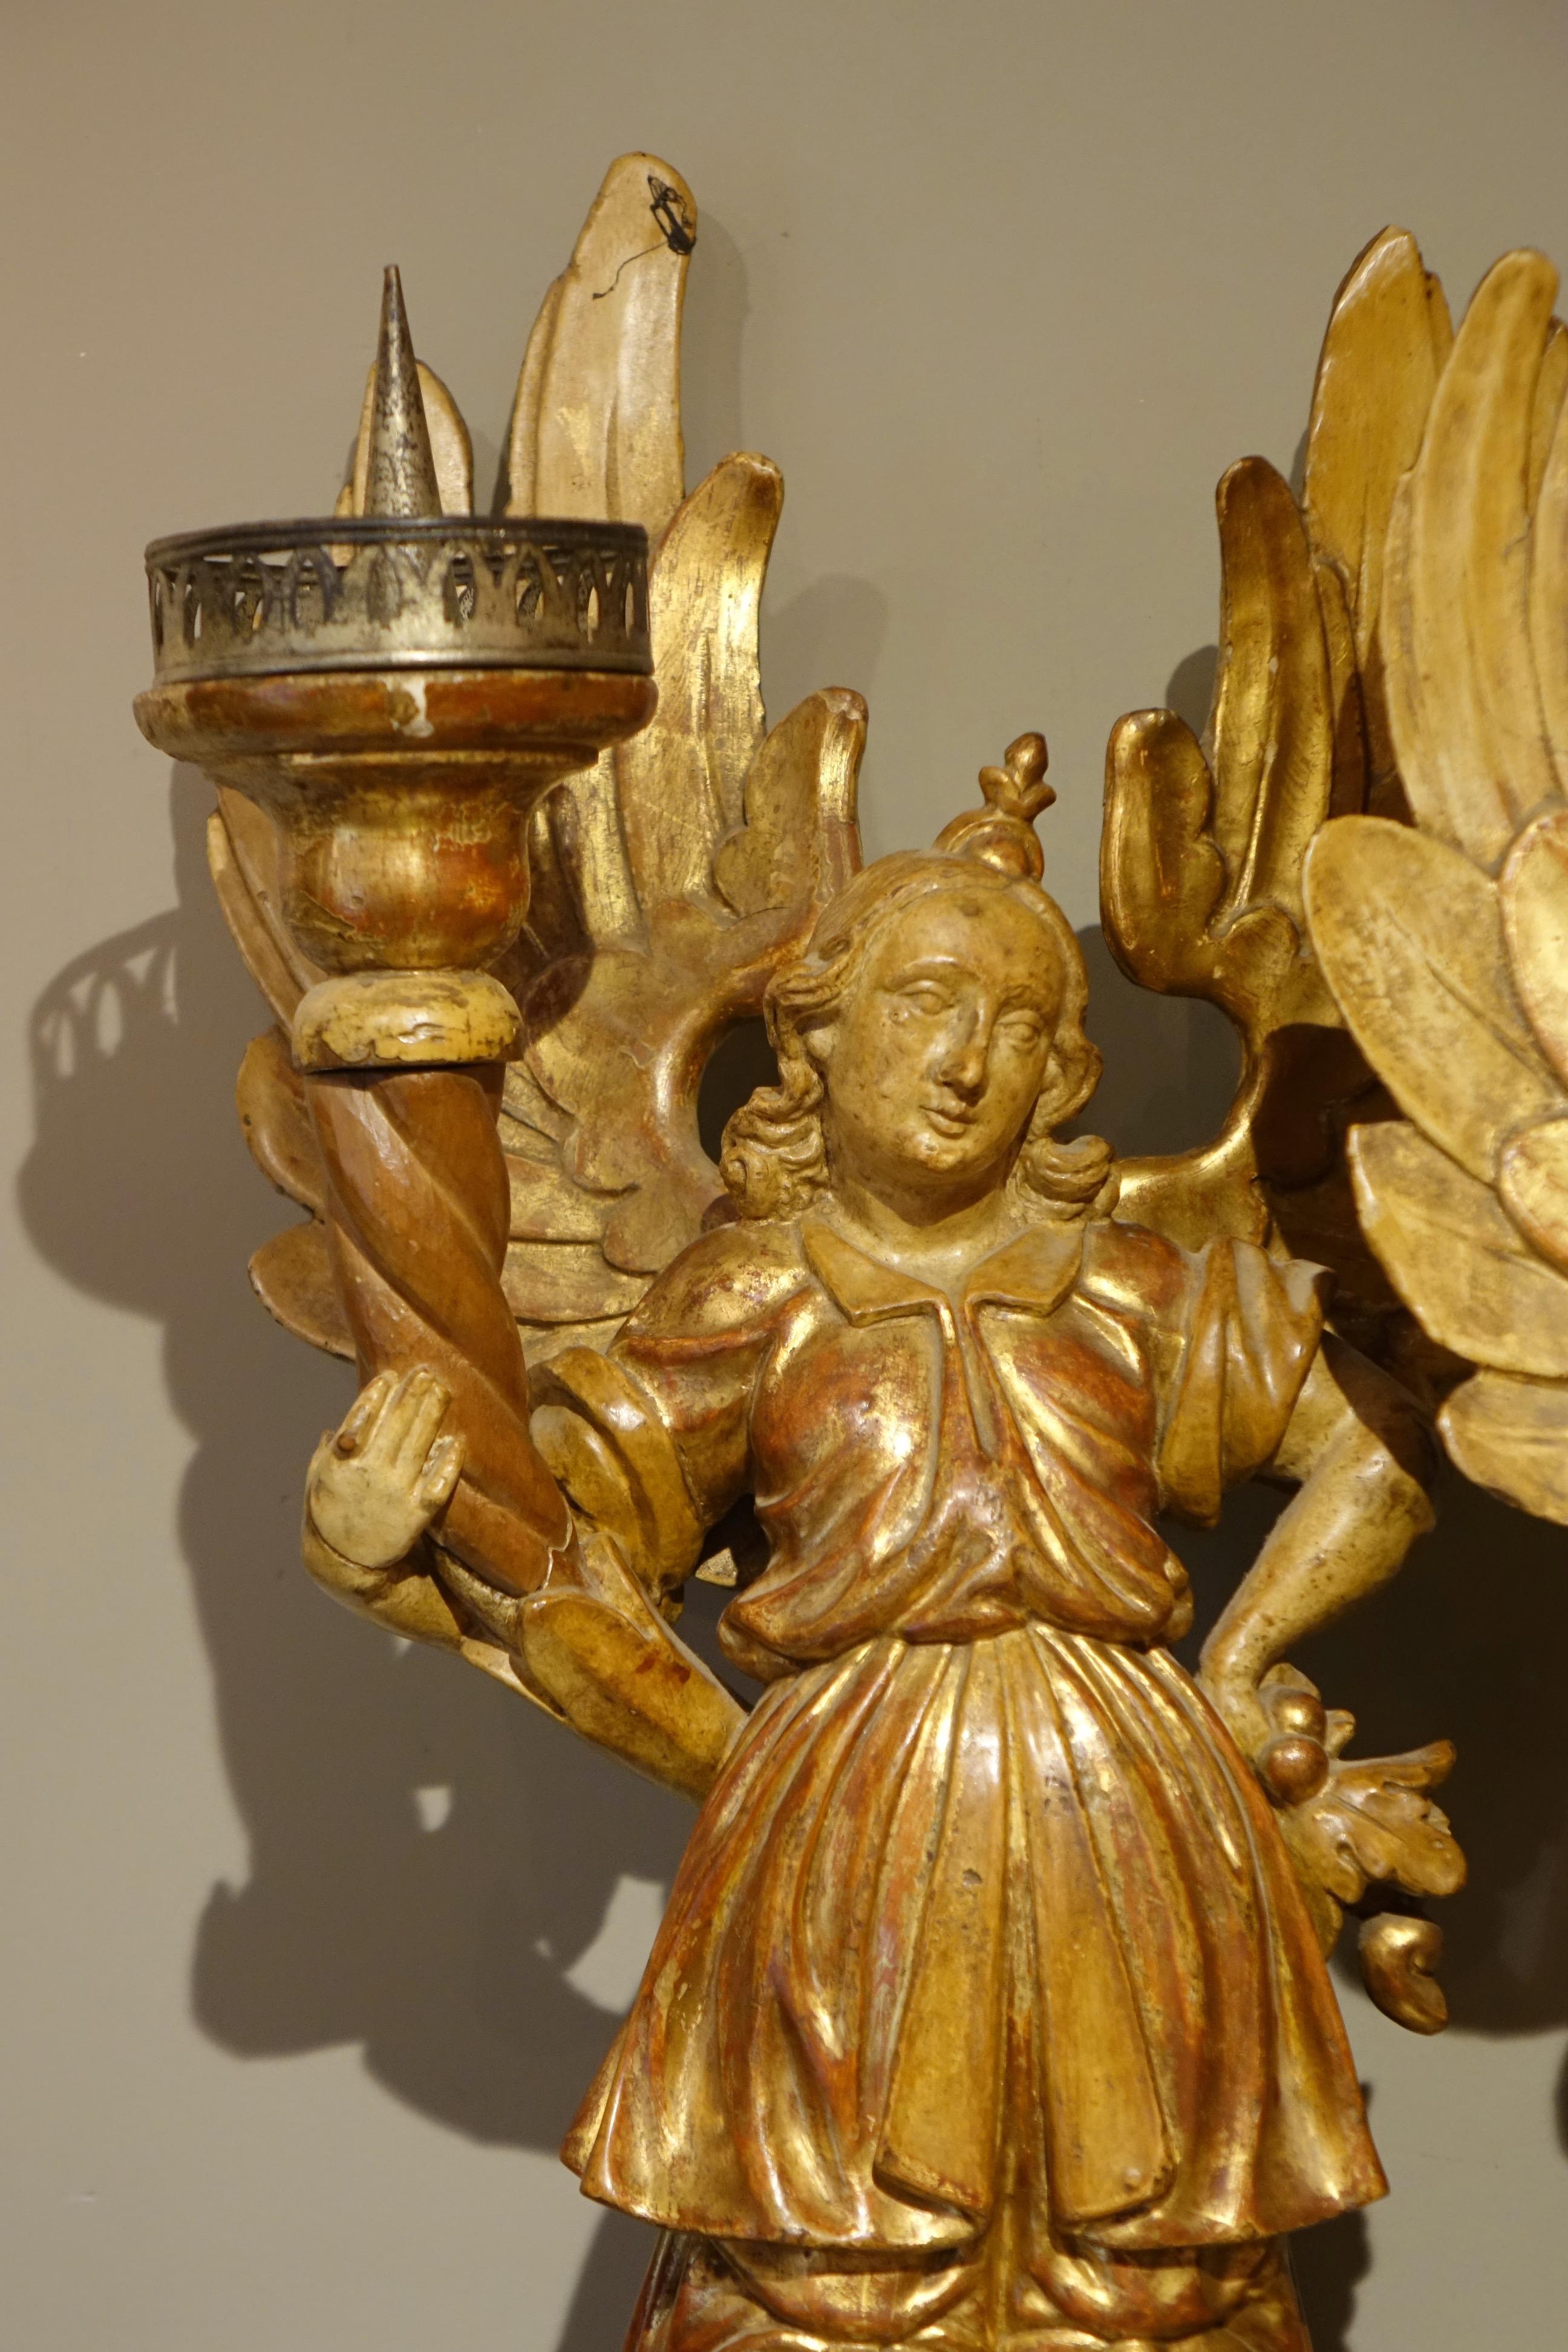 Four candle light angels, Provence or Italy 17th century
Rare set of four  angels, bearers of the light brought by Christ. 
Two stand on cherub-headed supports, one arm on the hip.
The other two are on supports with coats of arms, their hands on a